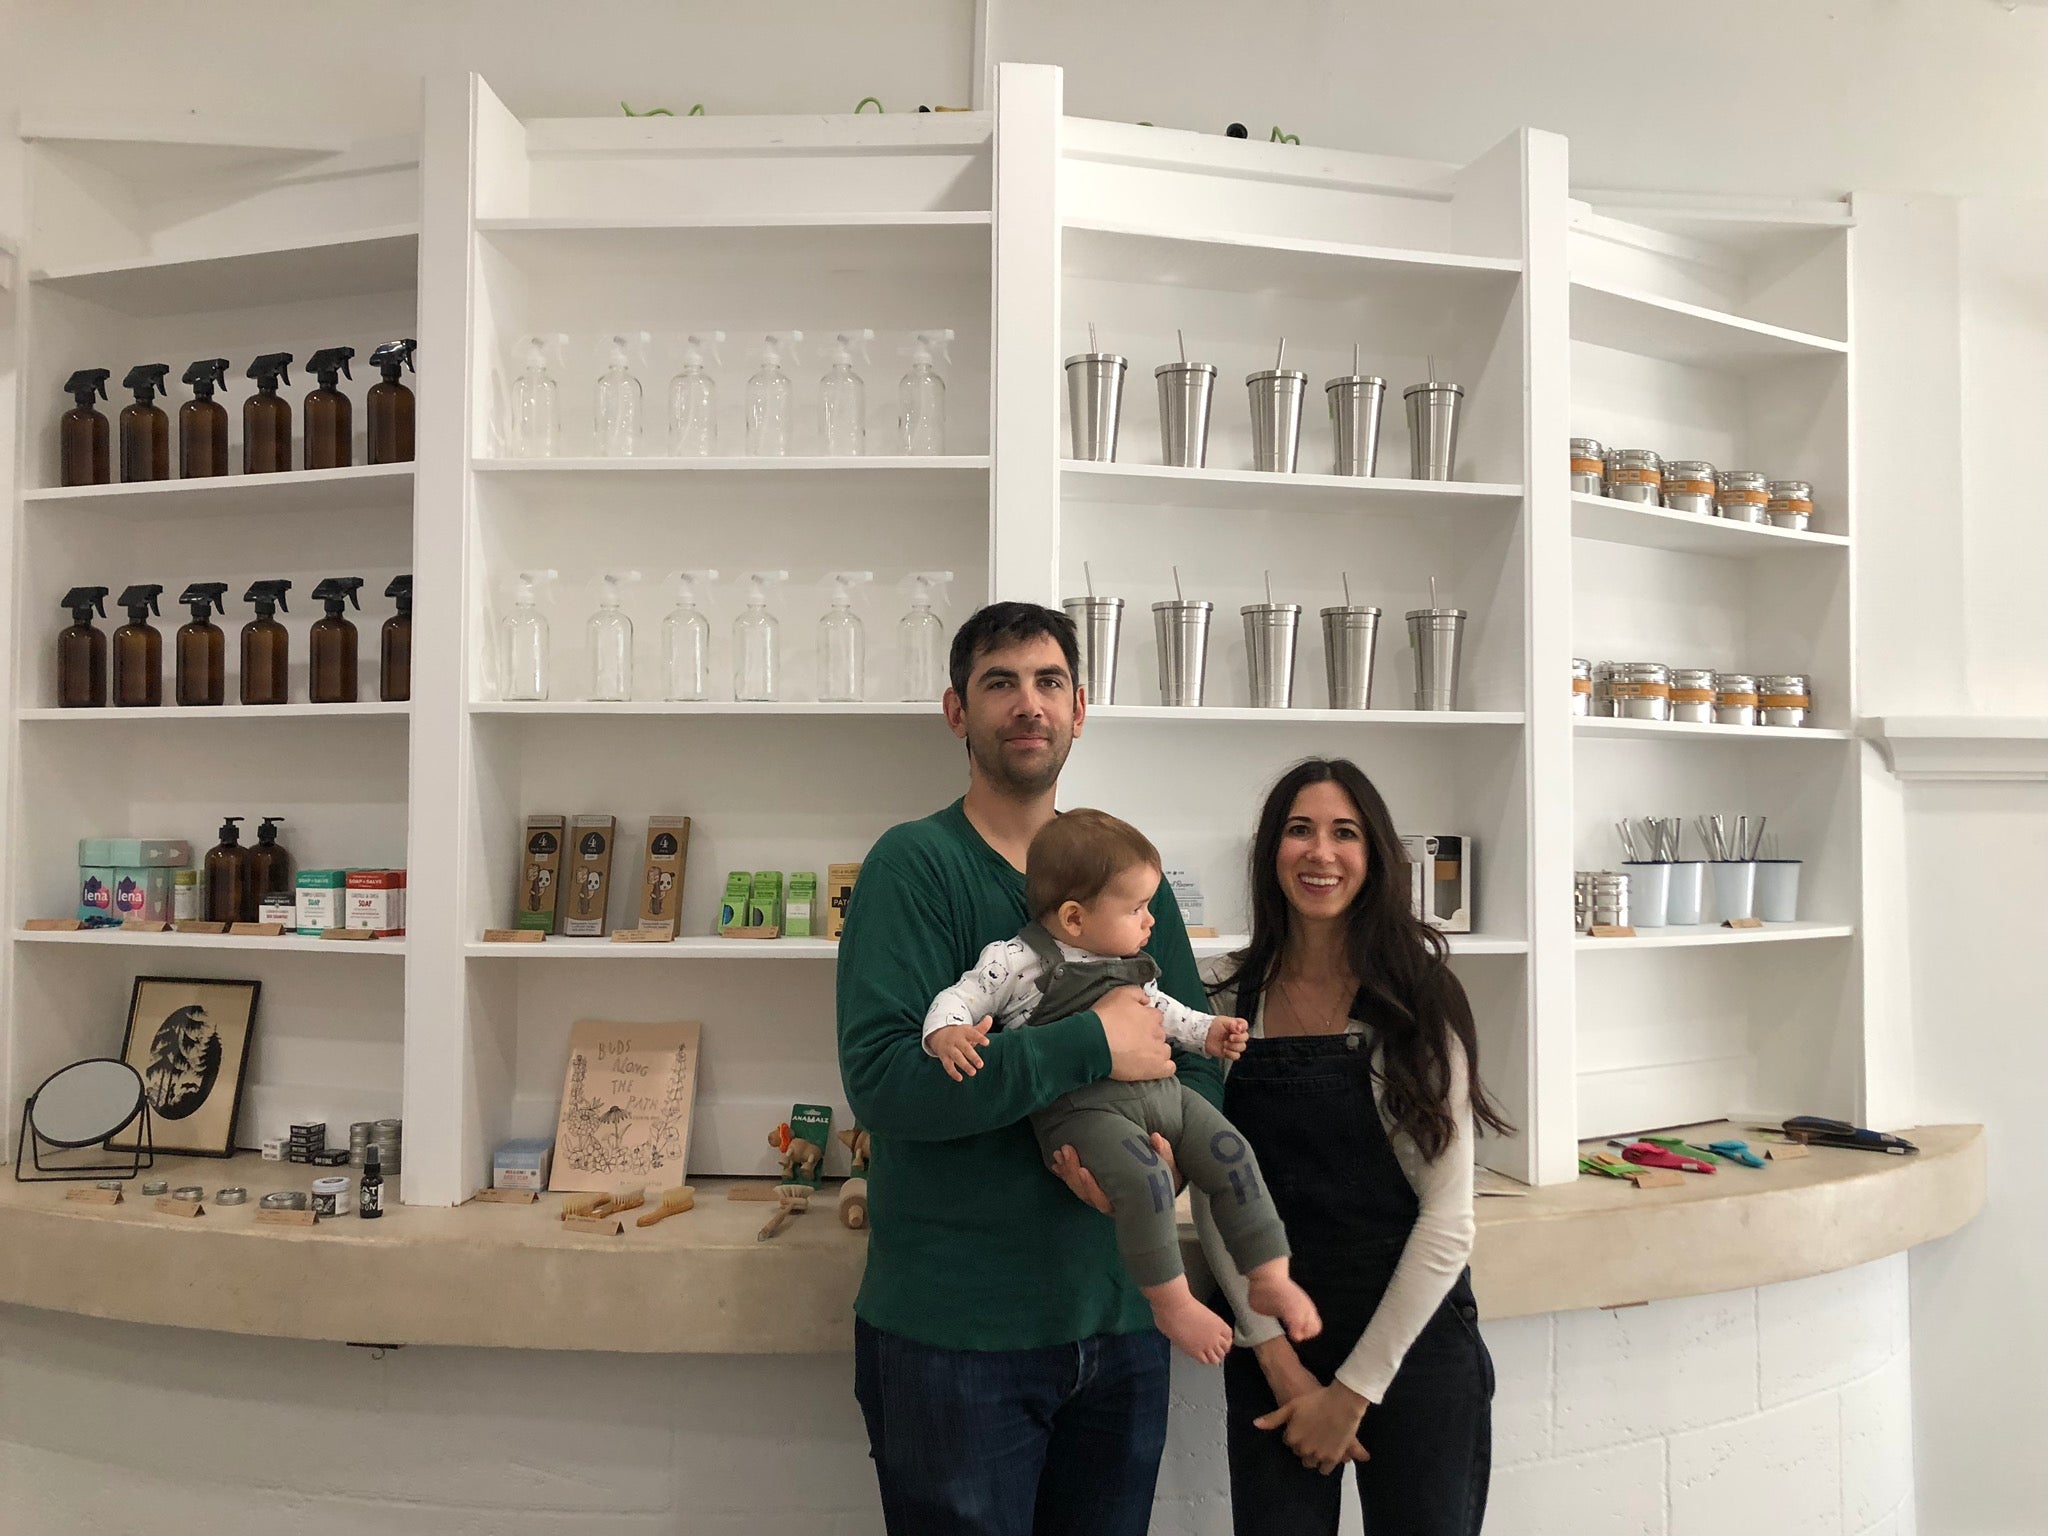 Owners of Wild Minimalist Max and Lily Cameron in their store located in San Anselmo, California with their son Grant.